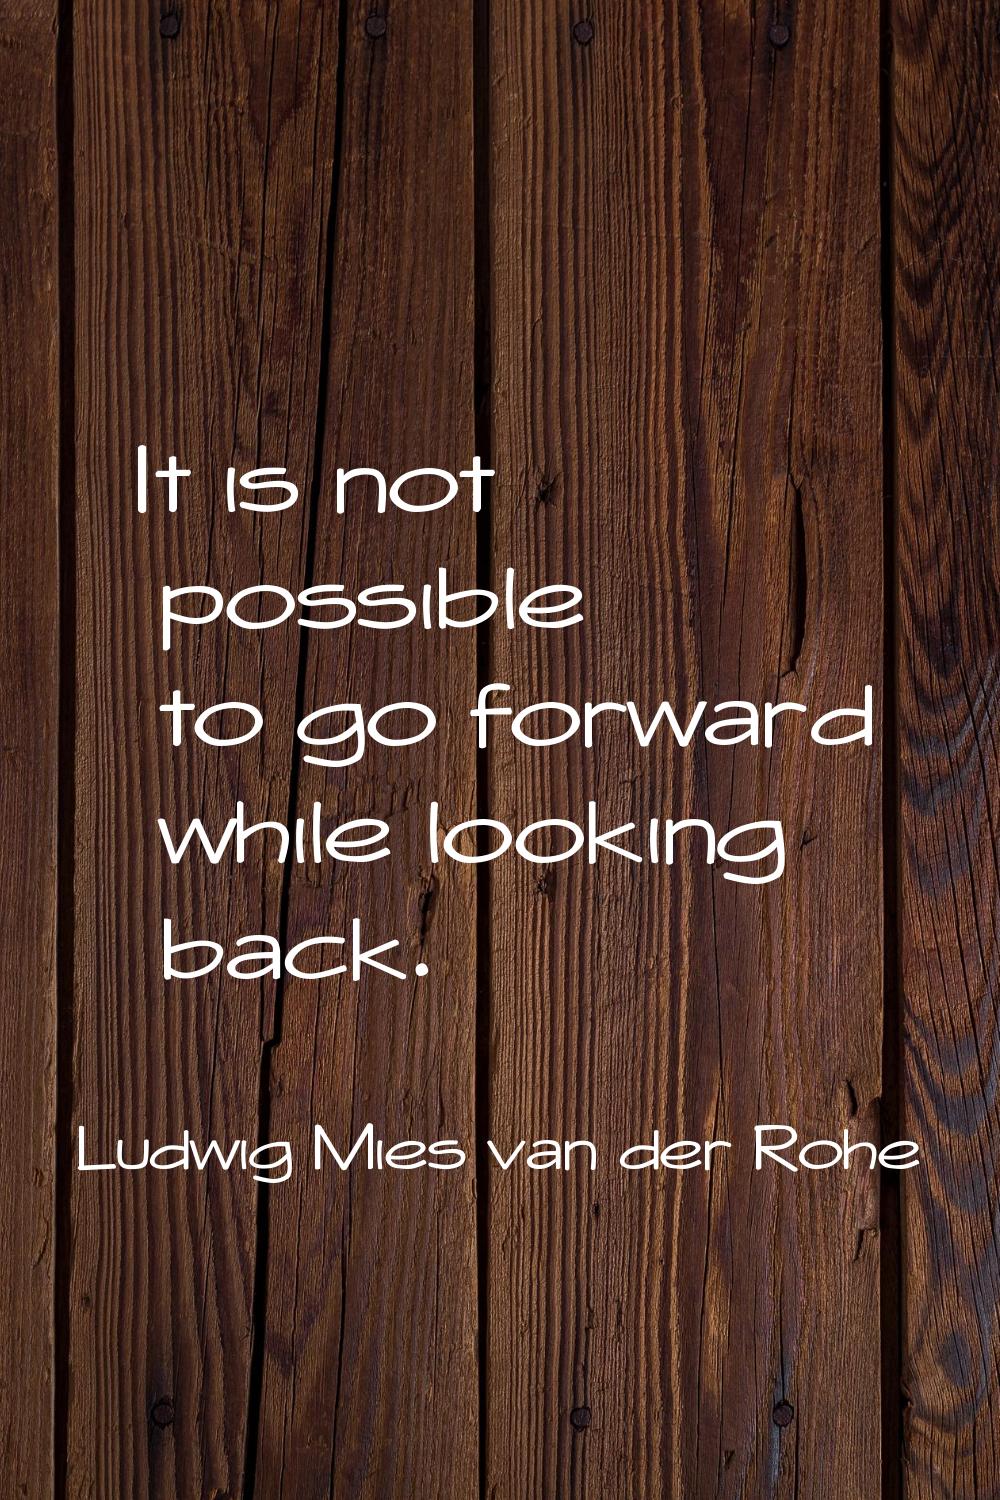 It is not possible to go forward while looking back.